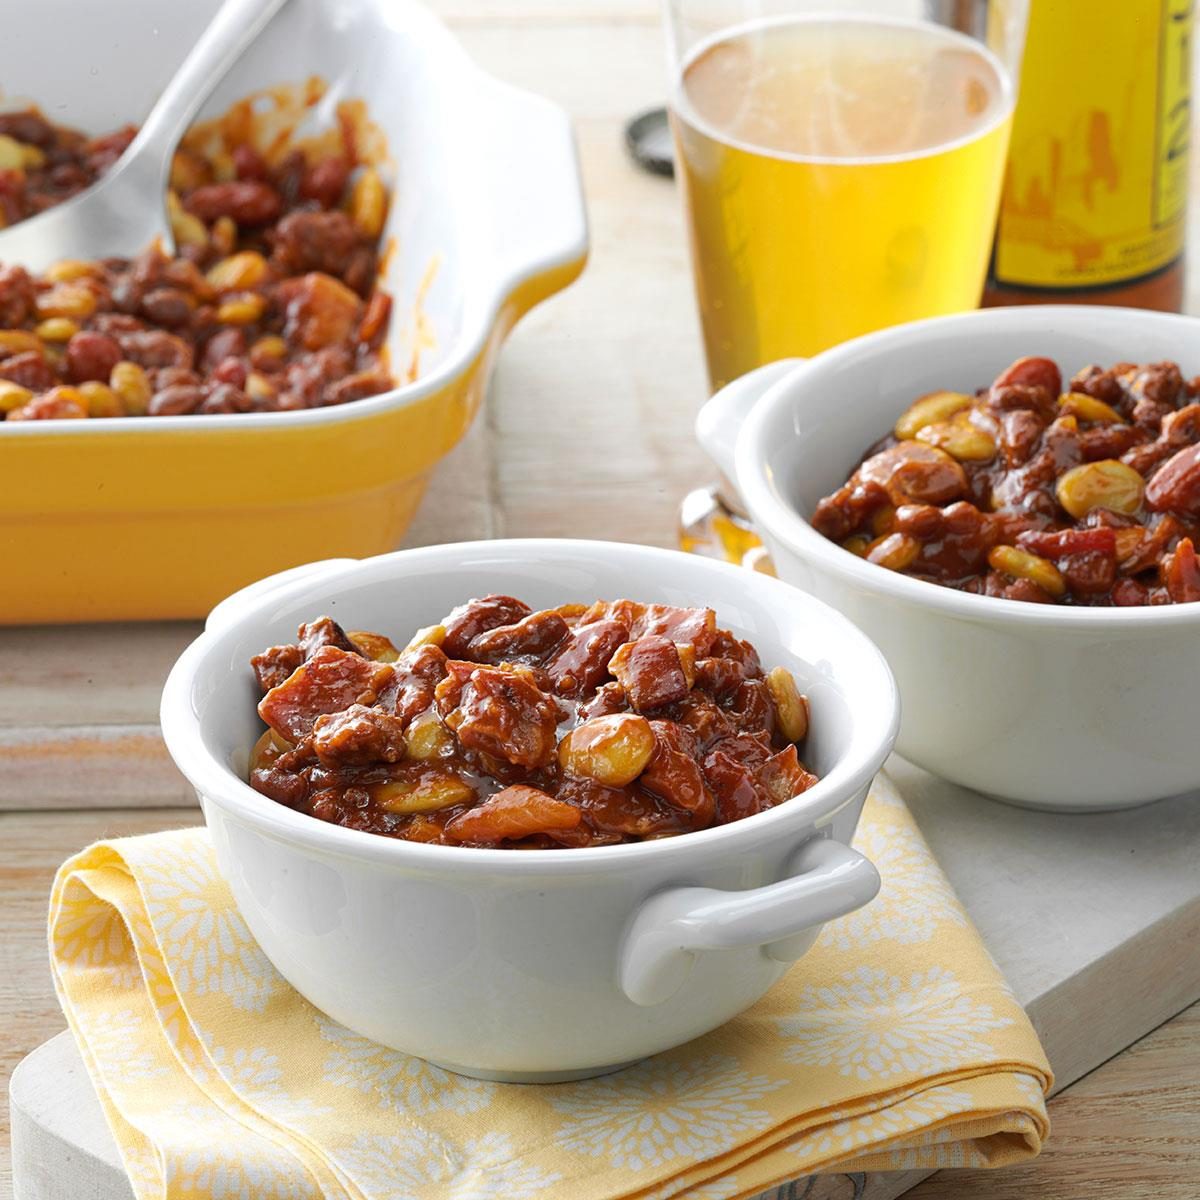 Day 4: Fourth of July Bean Casserole